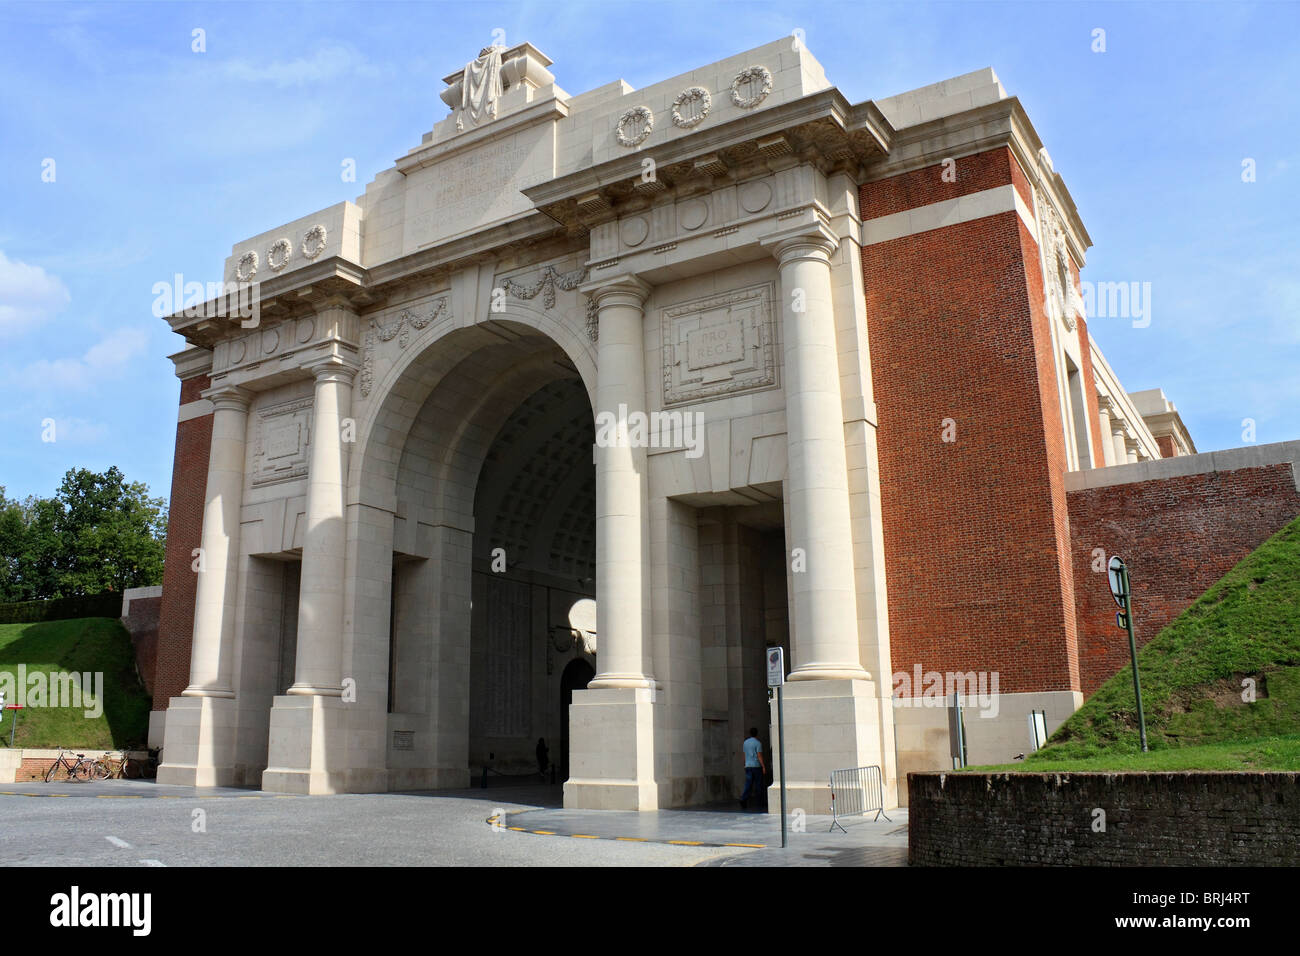 The Menin Gate Memorial to the Missing, for Allied soldiers killed in Ypres Salient of World War I. Ypres, Belgium. Stock Photo